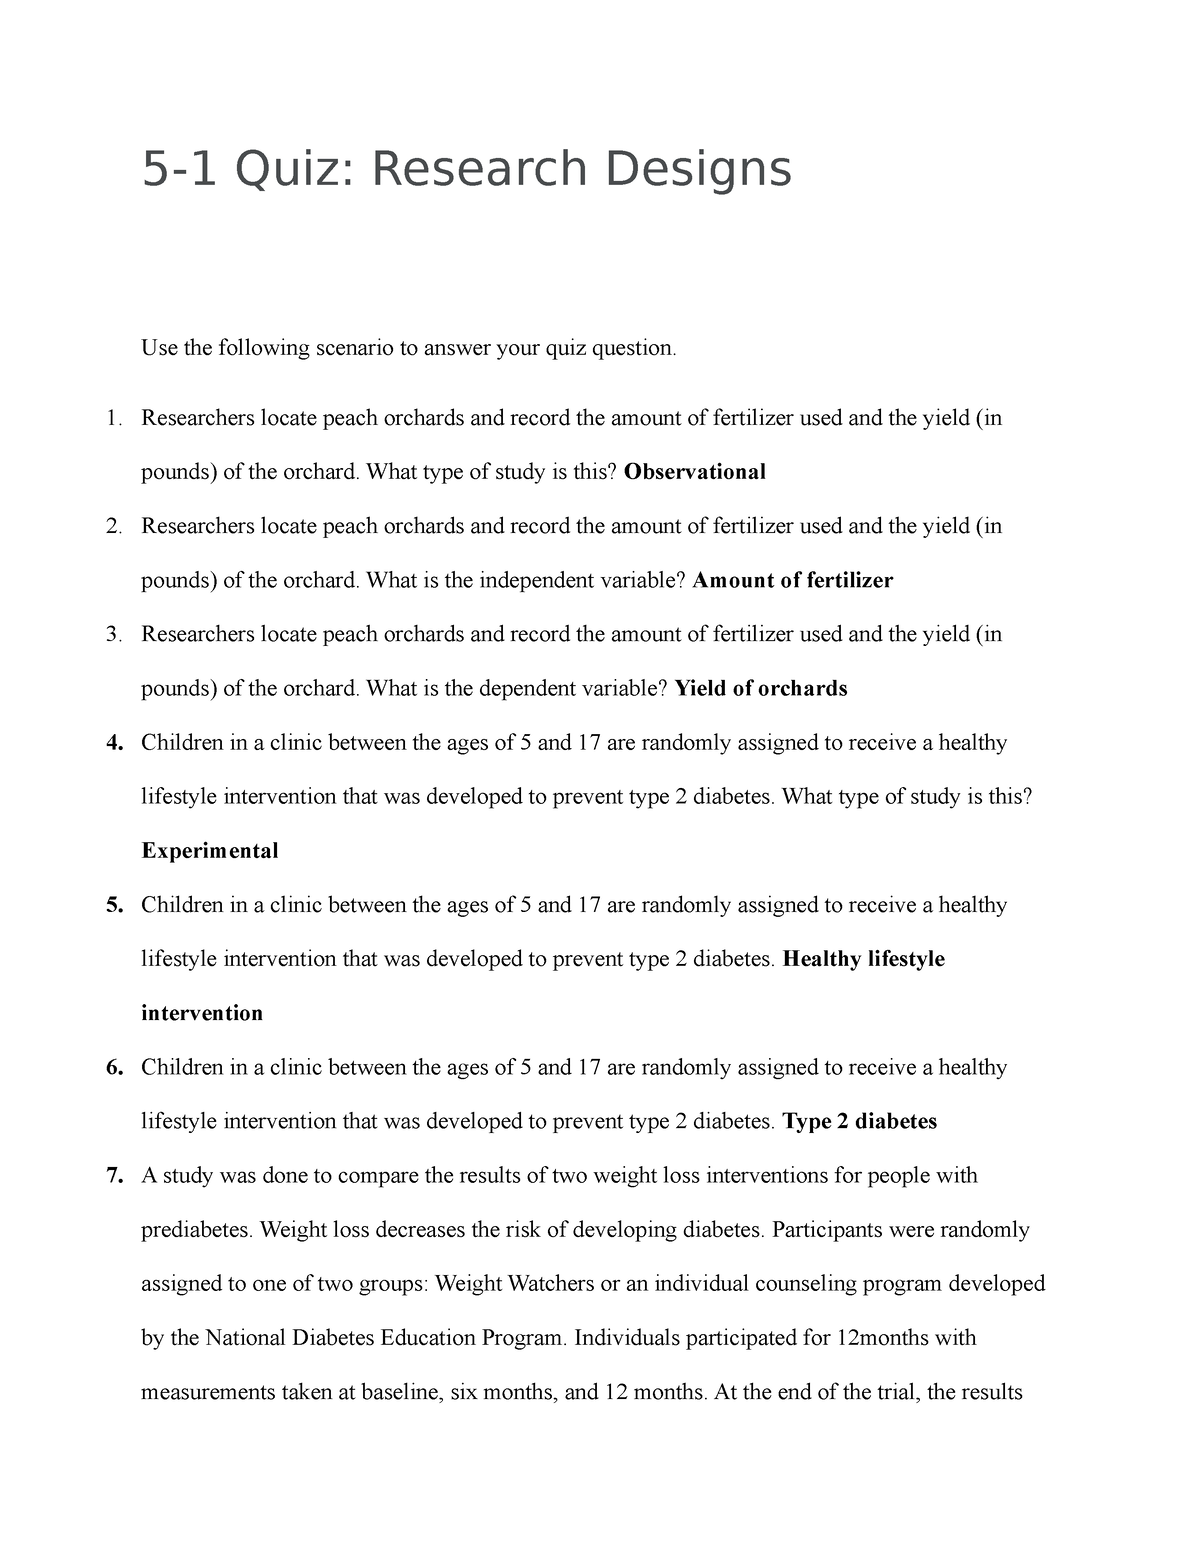 research design questions and answers pdf